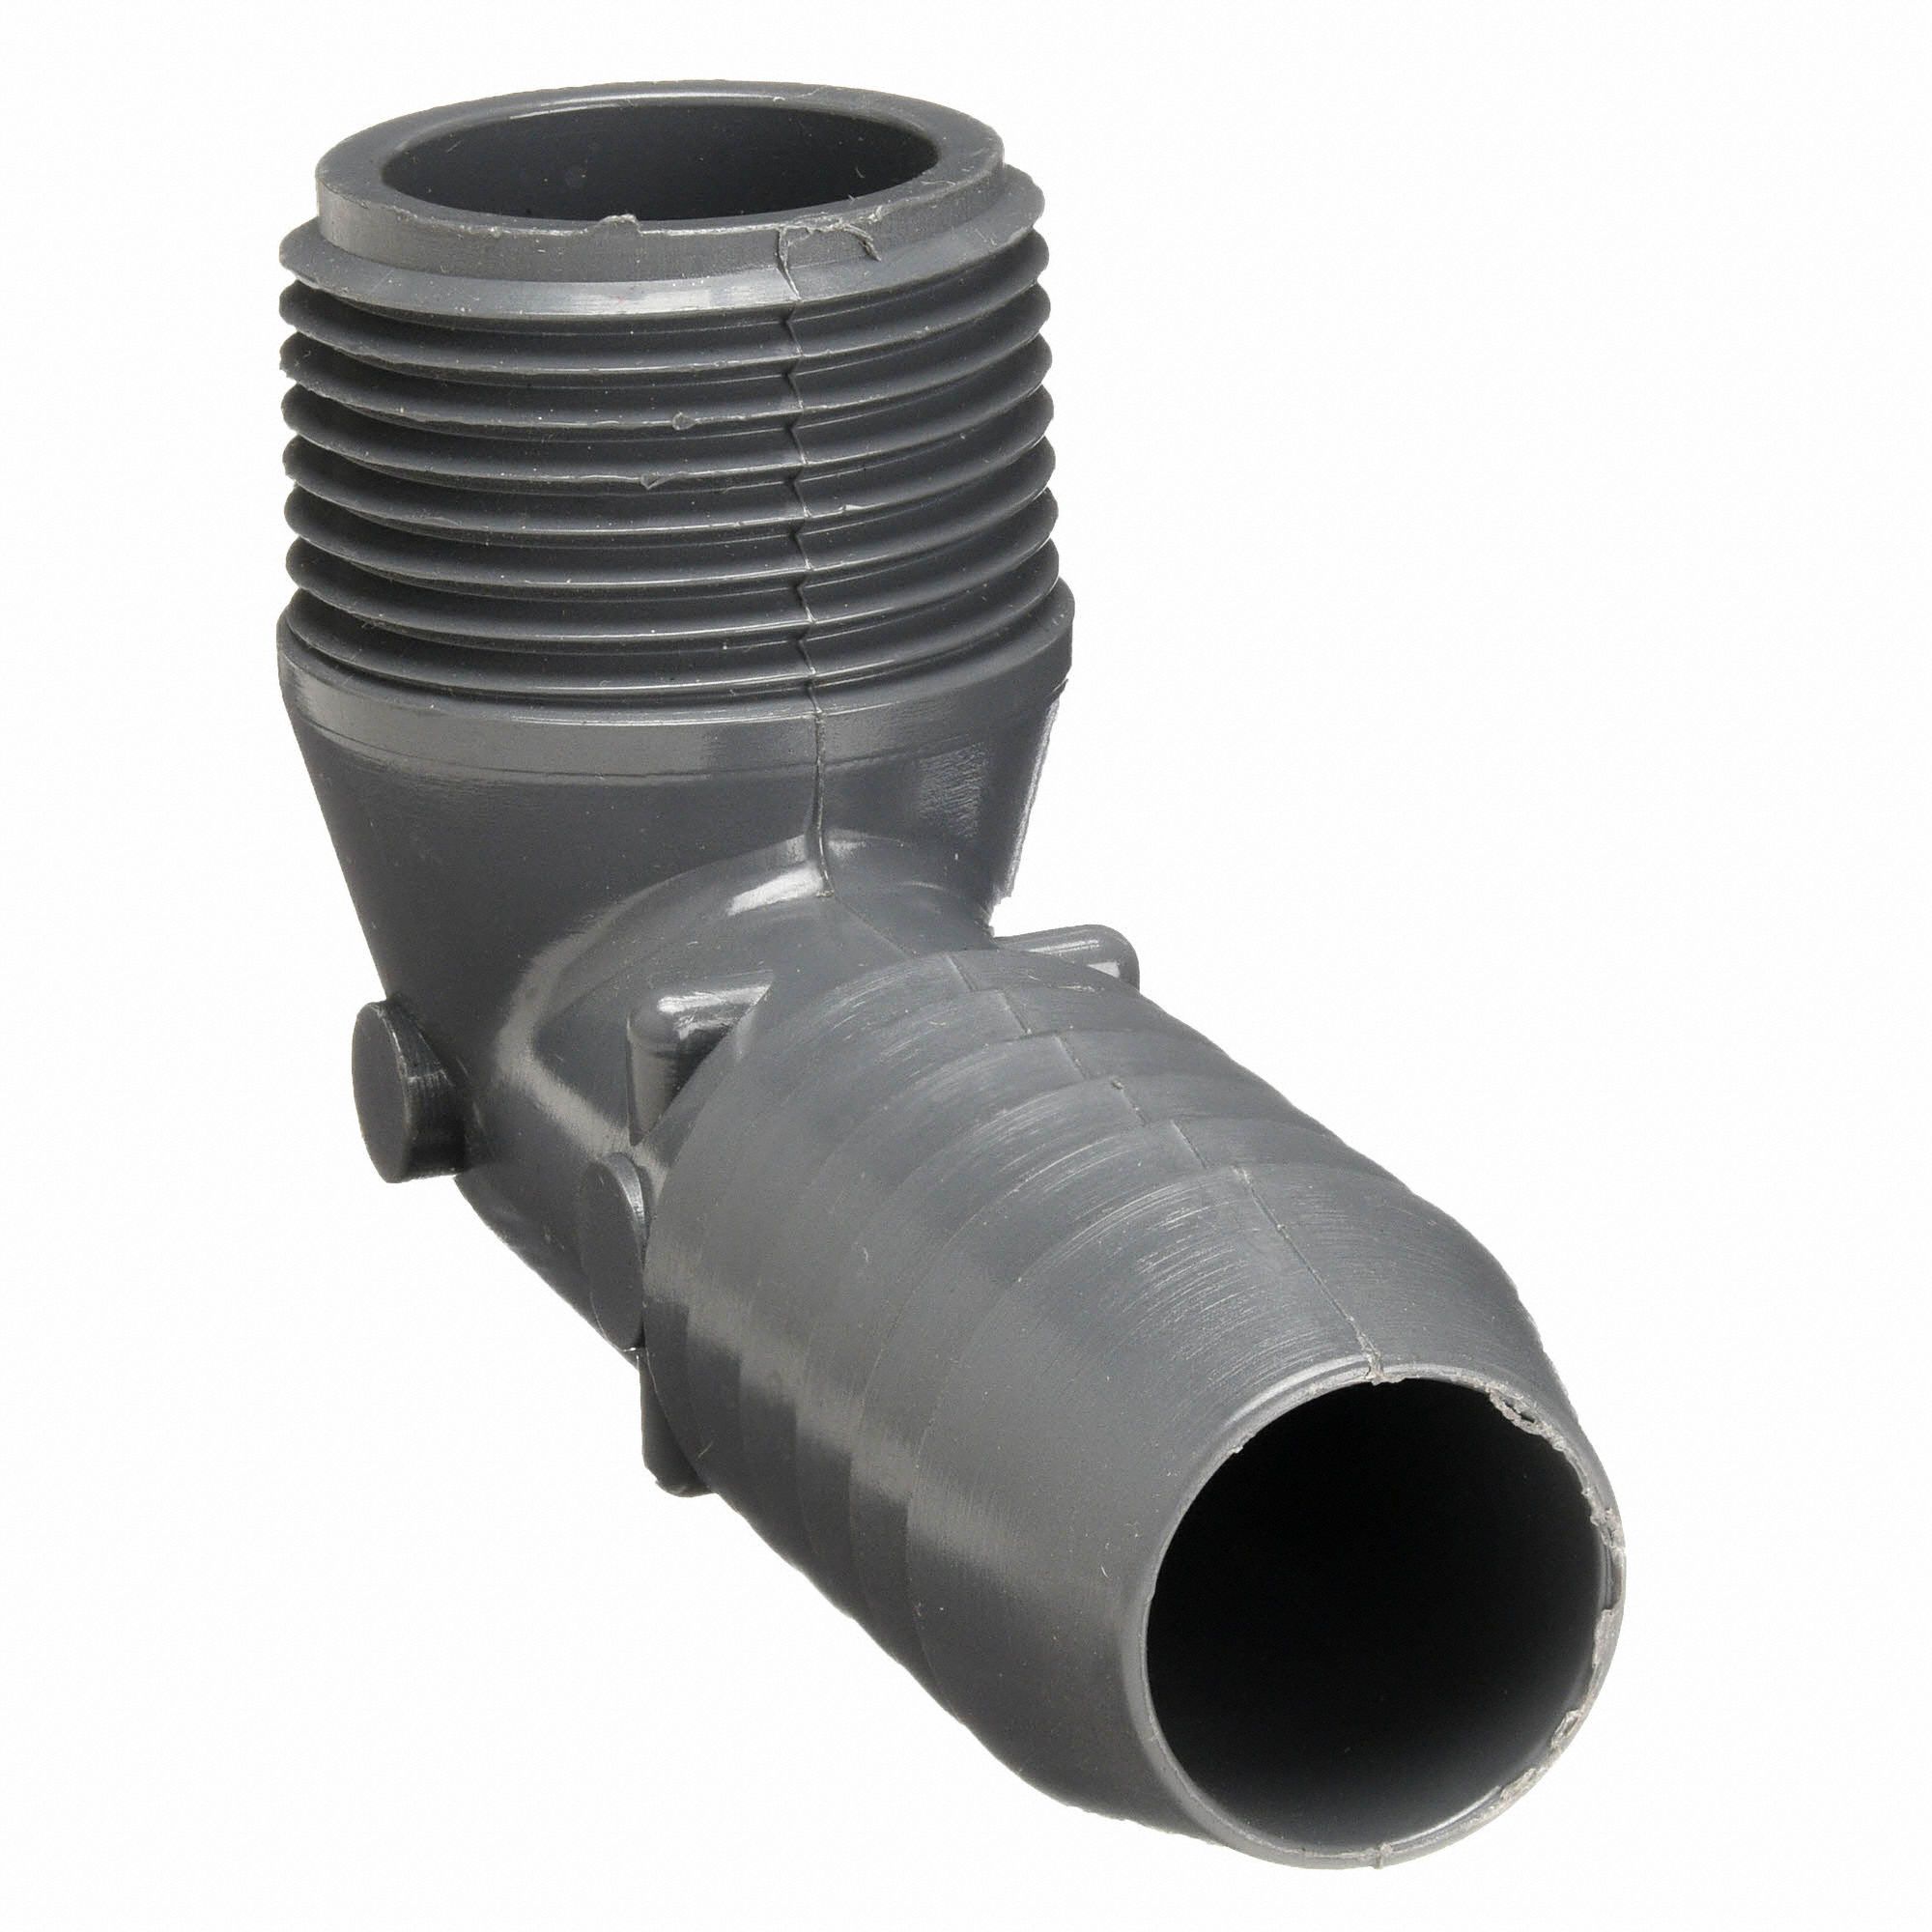 LASCO 3/4 In PVC Poly Insert 90 Degree Barb X Barb Elbow 1406007rmc 36 for sale online 